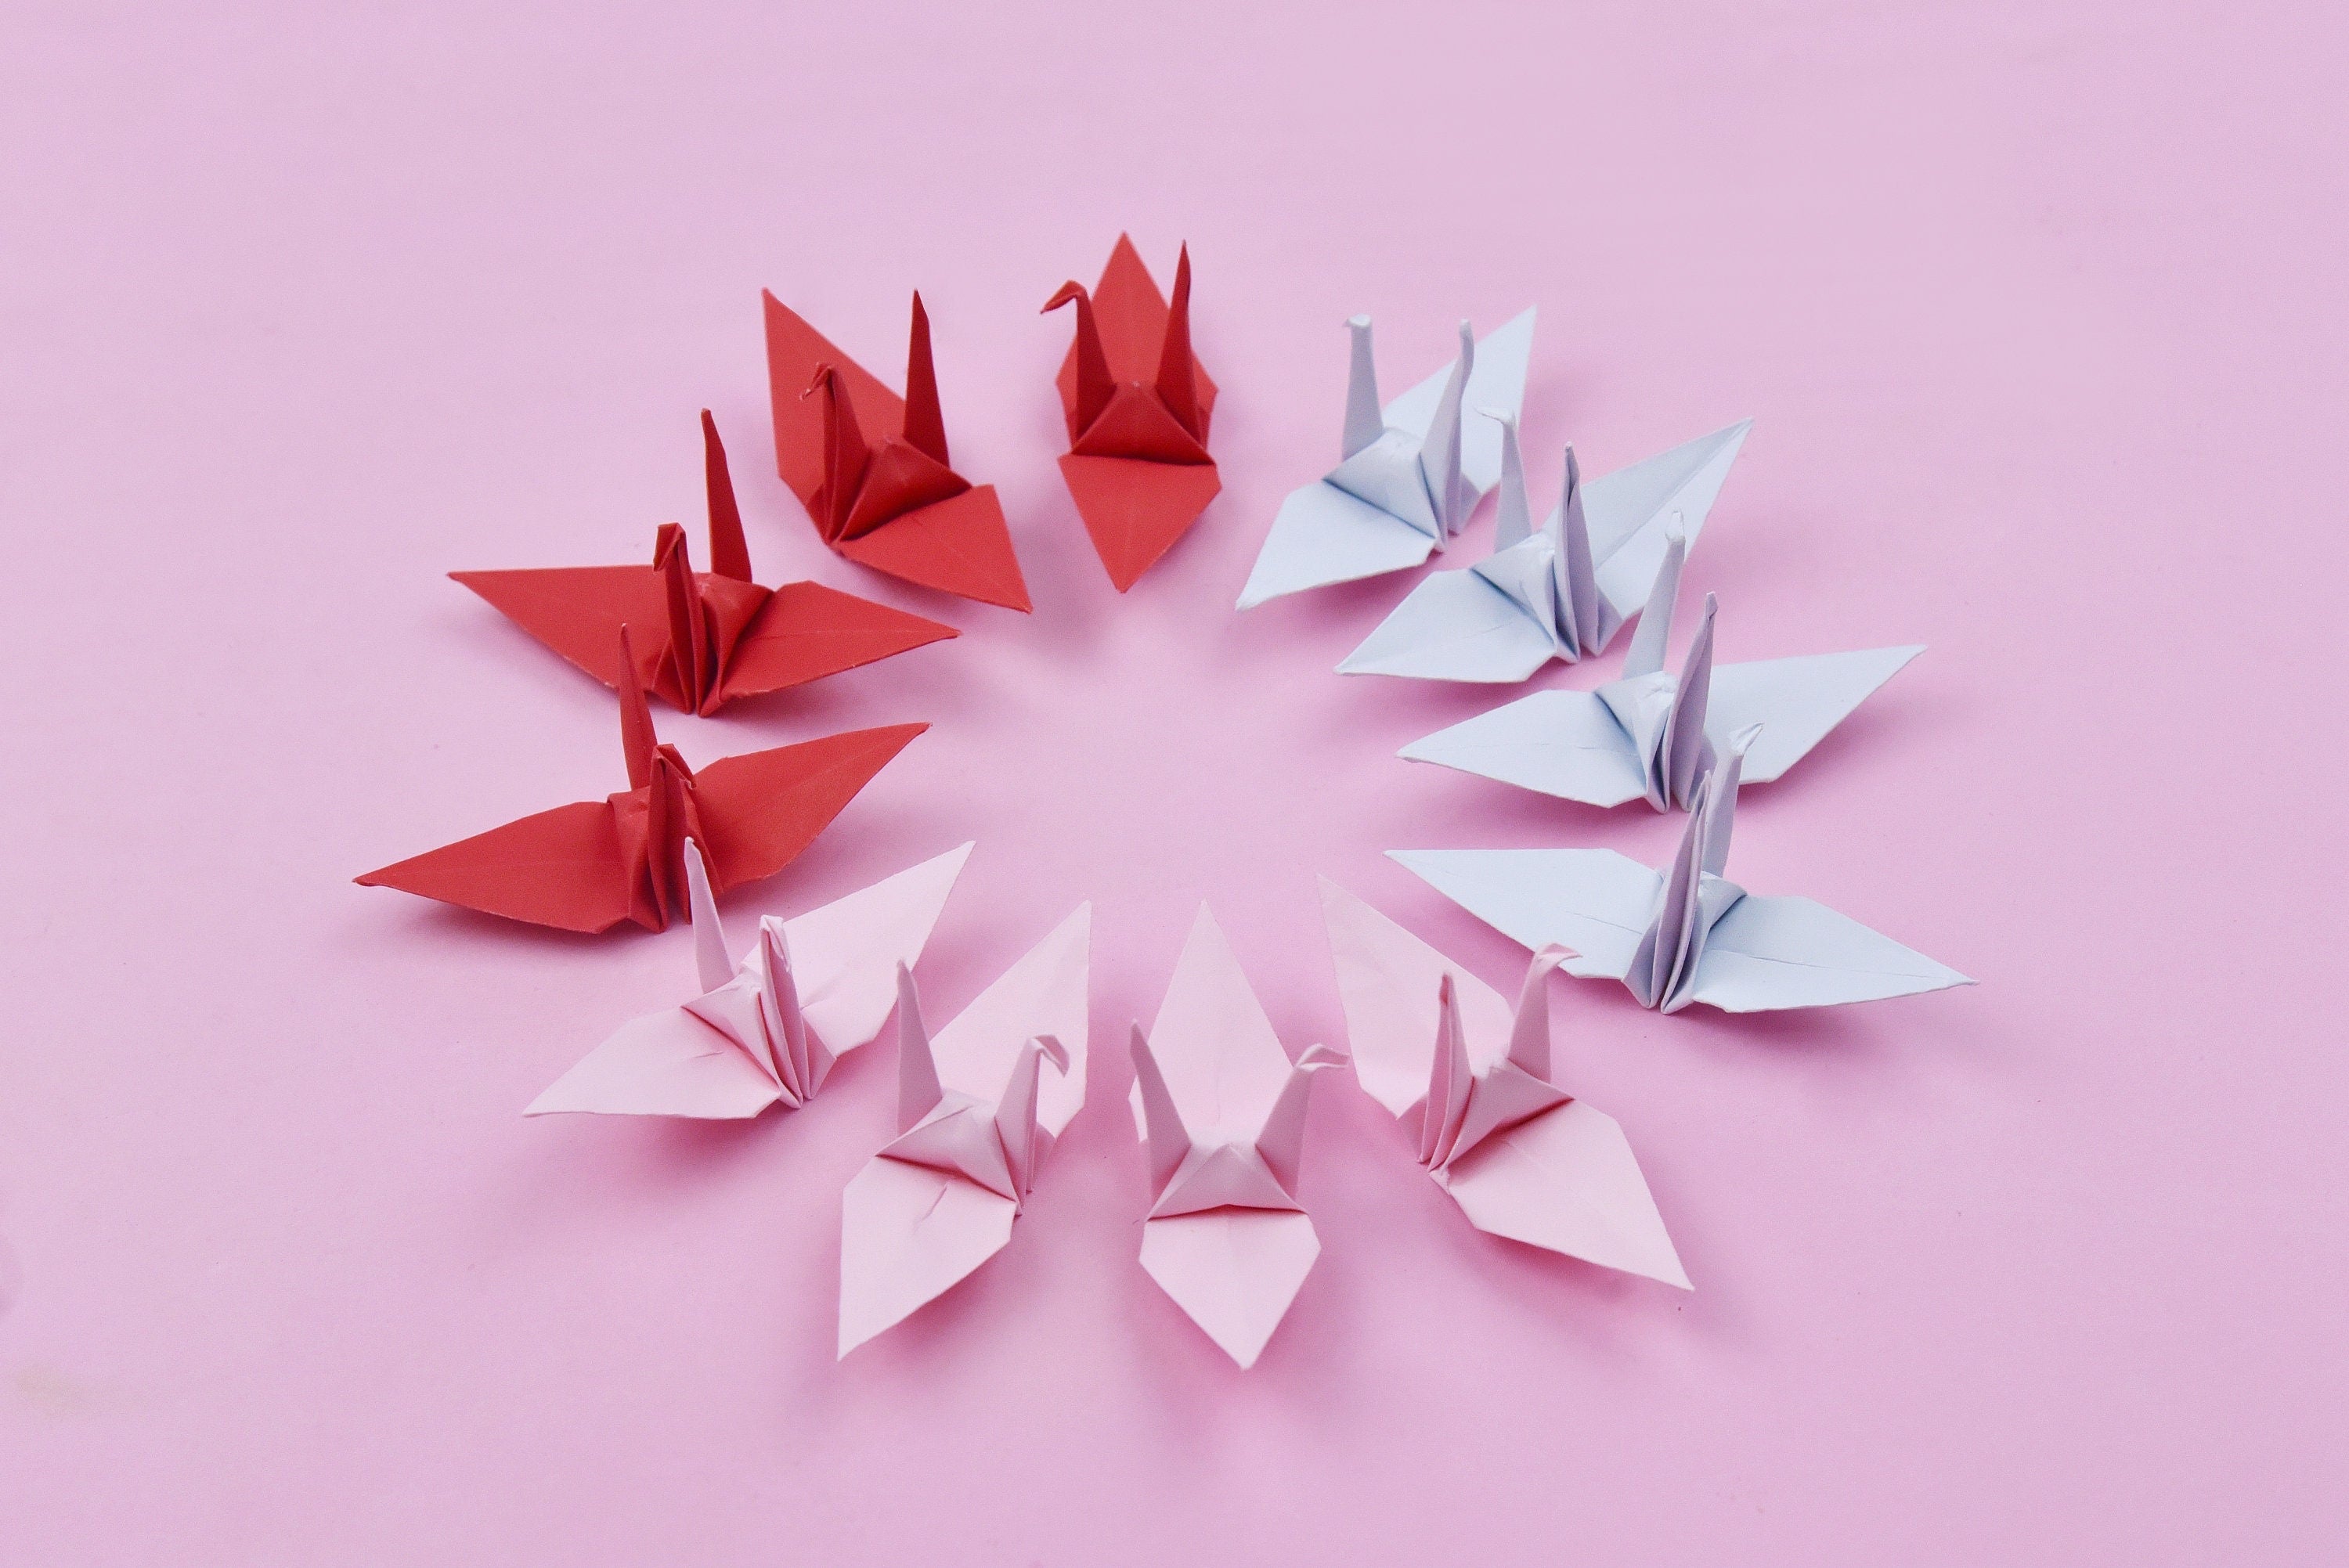 100 Origami Paper Crane Pink Red Shade 3x3 inches Handmade Folding for Wedding Decoration, Japanese Wedding, Valentines